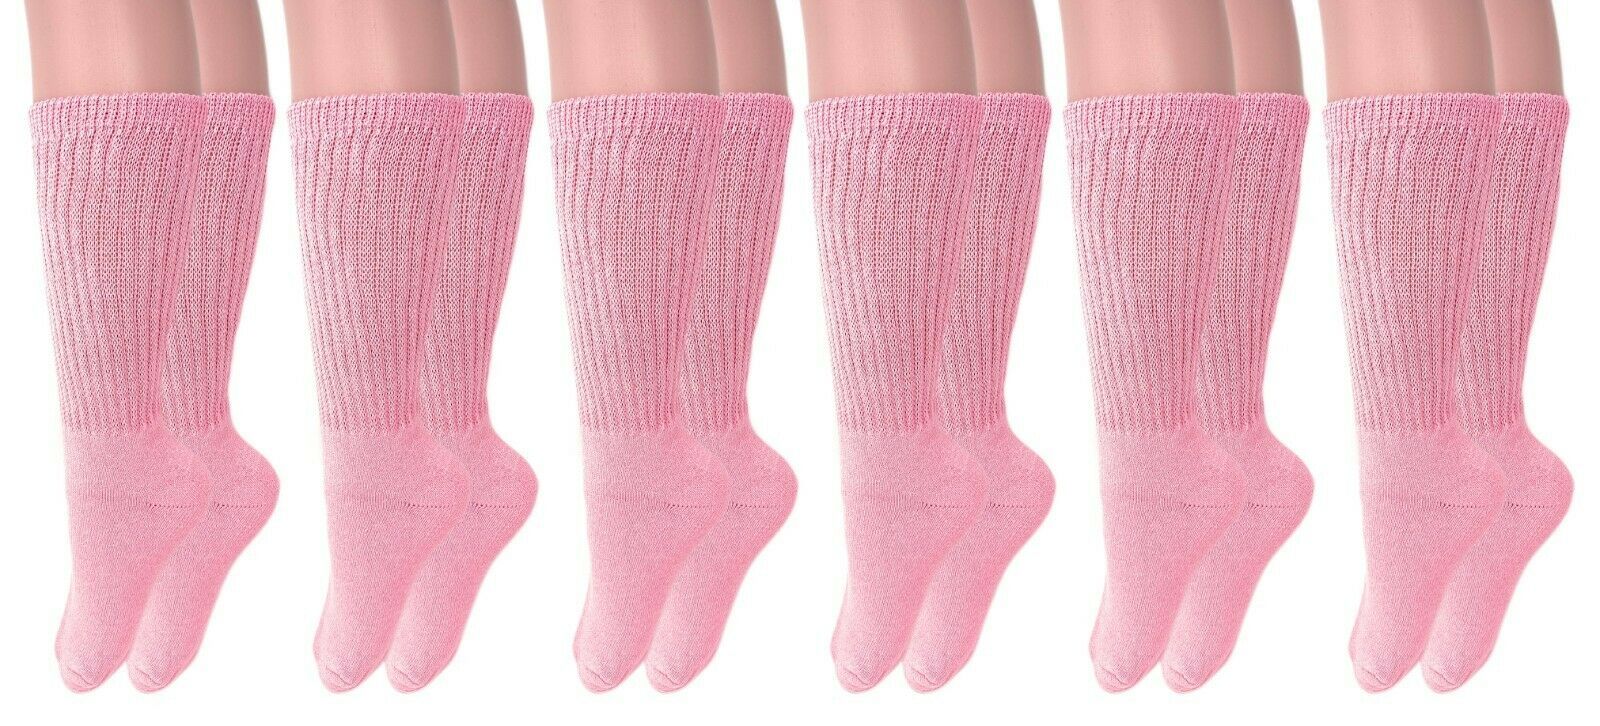 Primary image for Mid Calf Long Cotton Crew Socks for Women and Men 6 Pairs